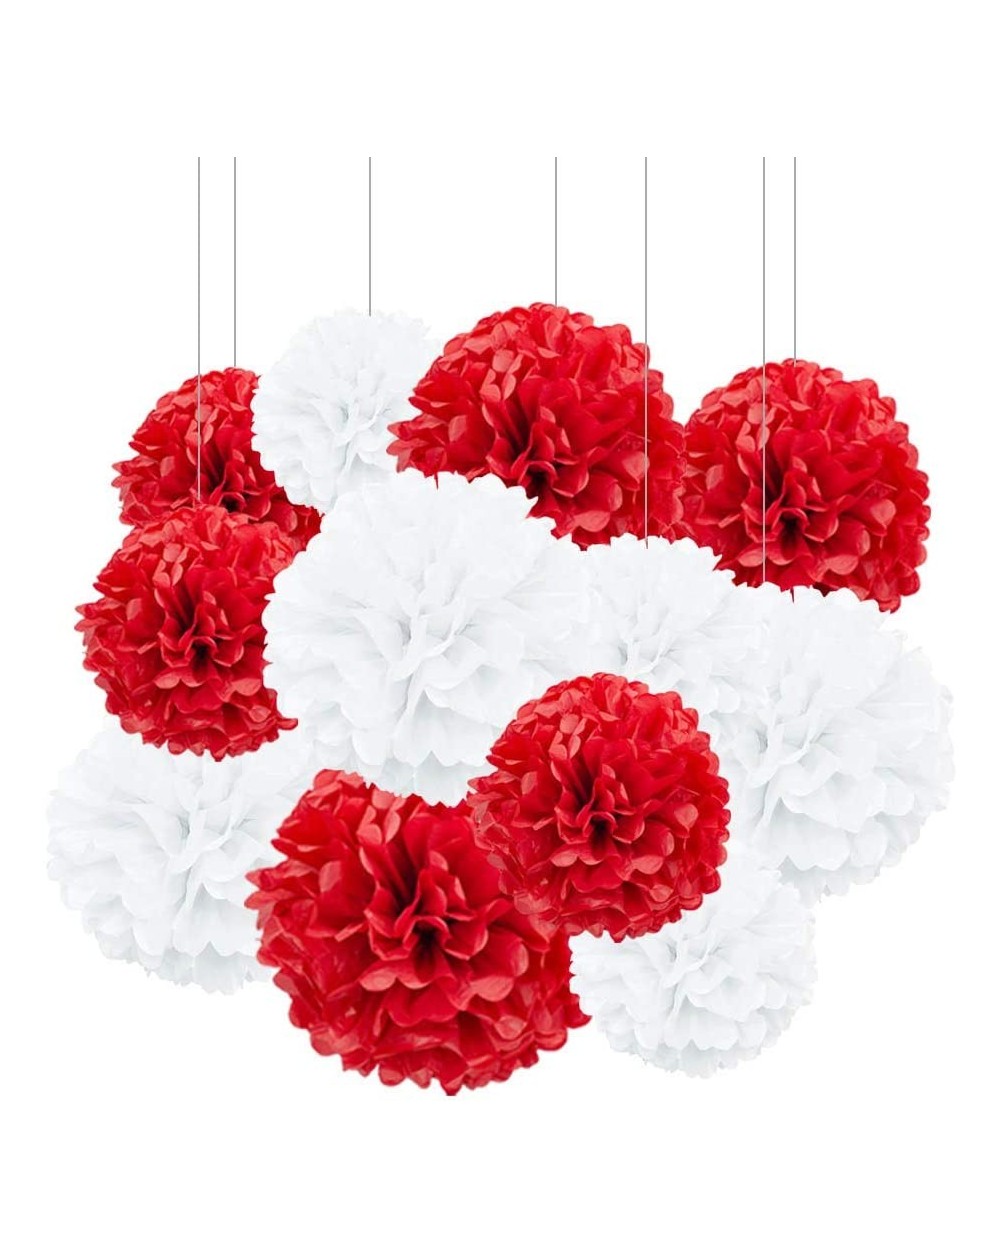 Tissue Pom Poms 12pcs Red and White Paper Pom Poms Decorations for Party Ceiling Wall Hanging Tissue Flowers Decorations - 2 ...